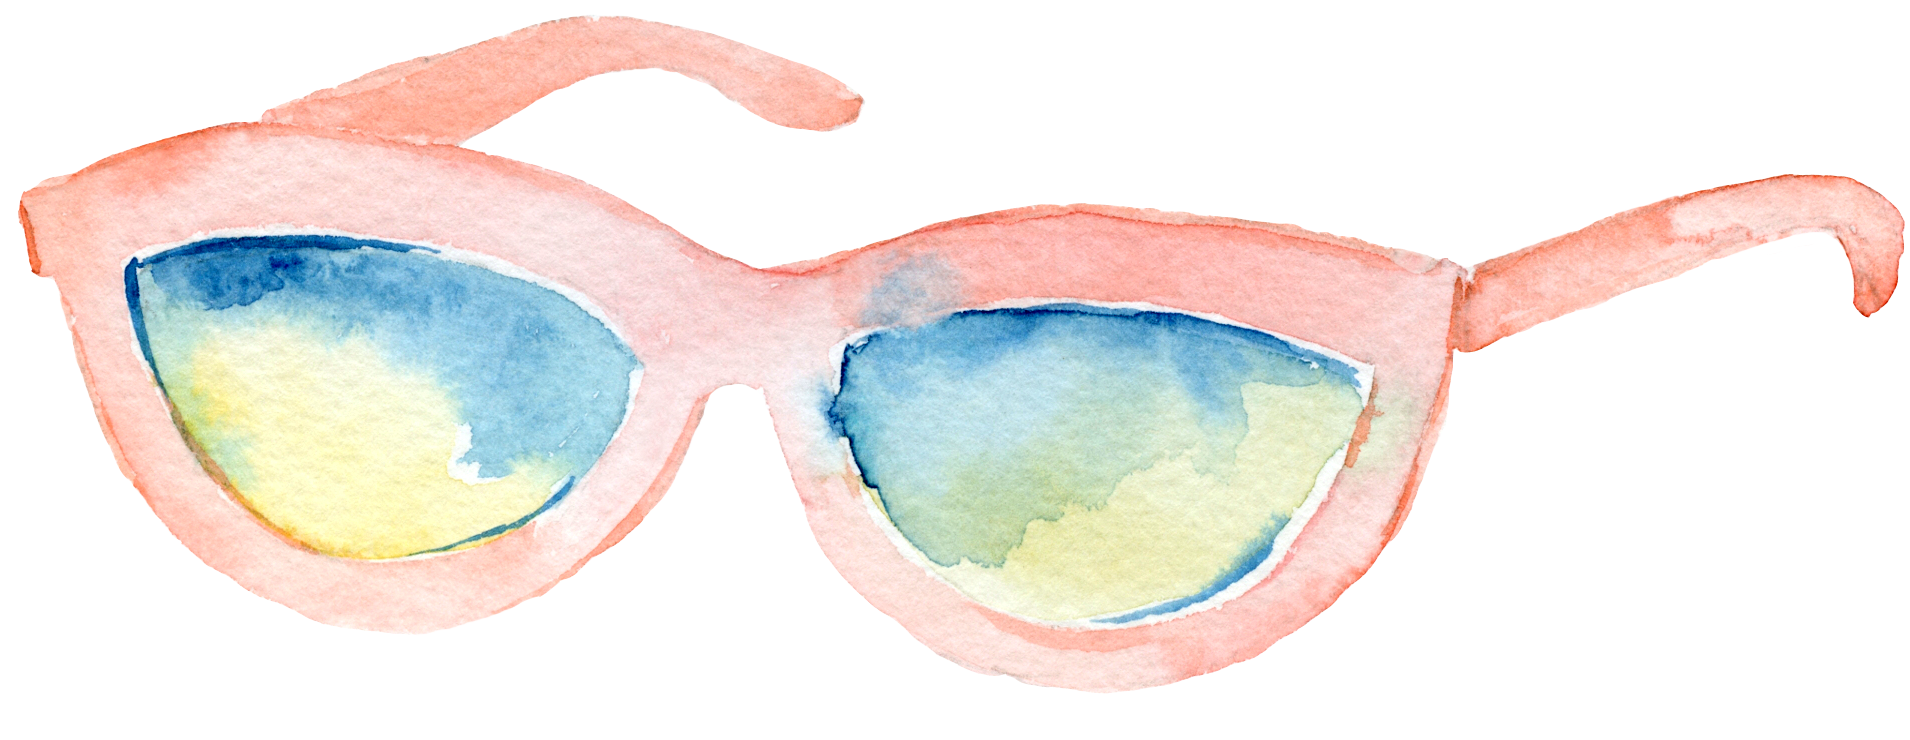 Goggles Sunglasses HQ Image Free PNG Clipart